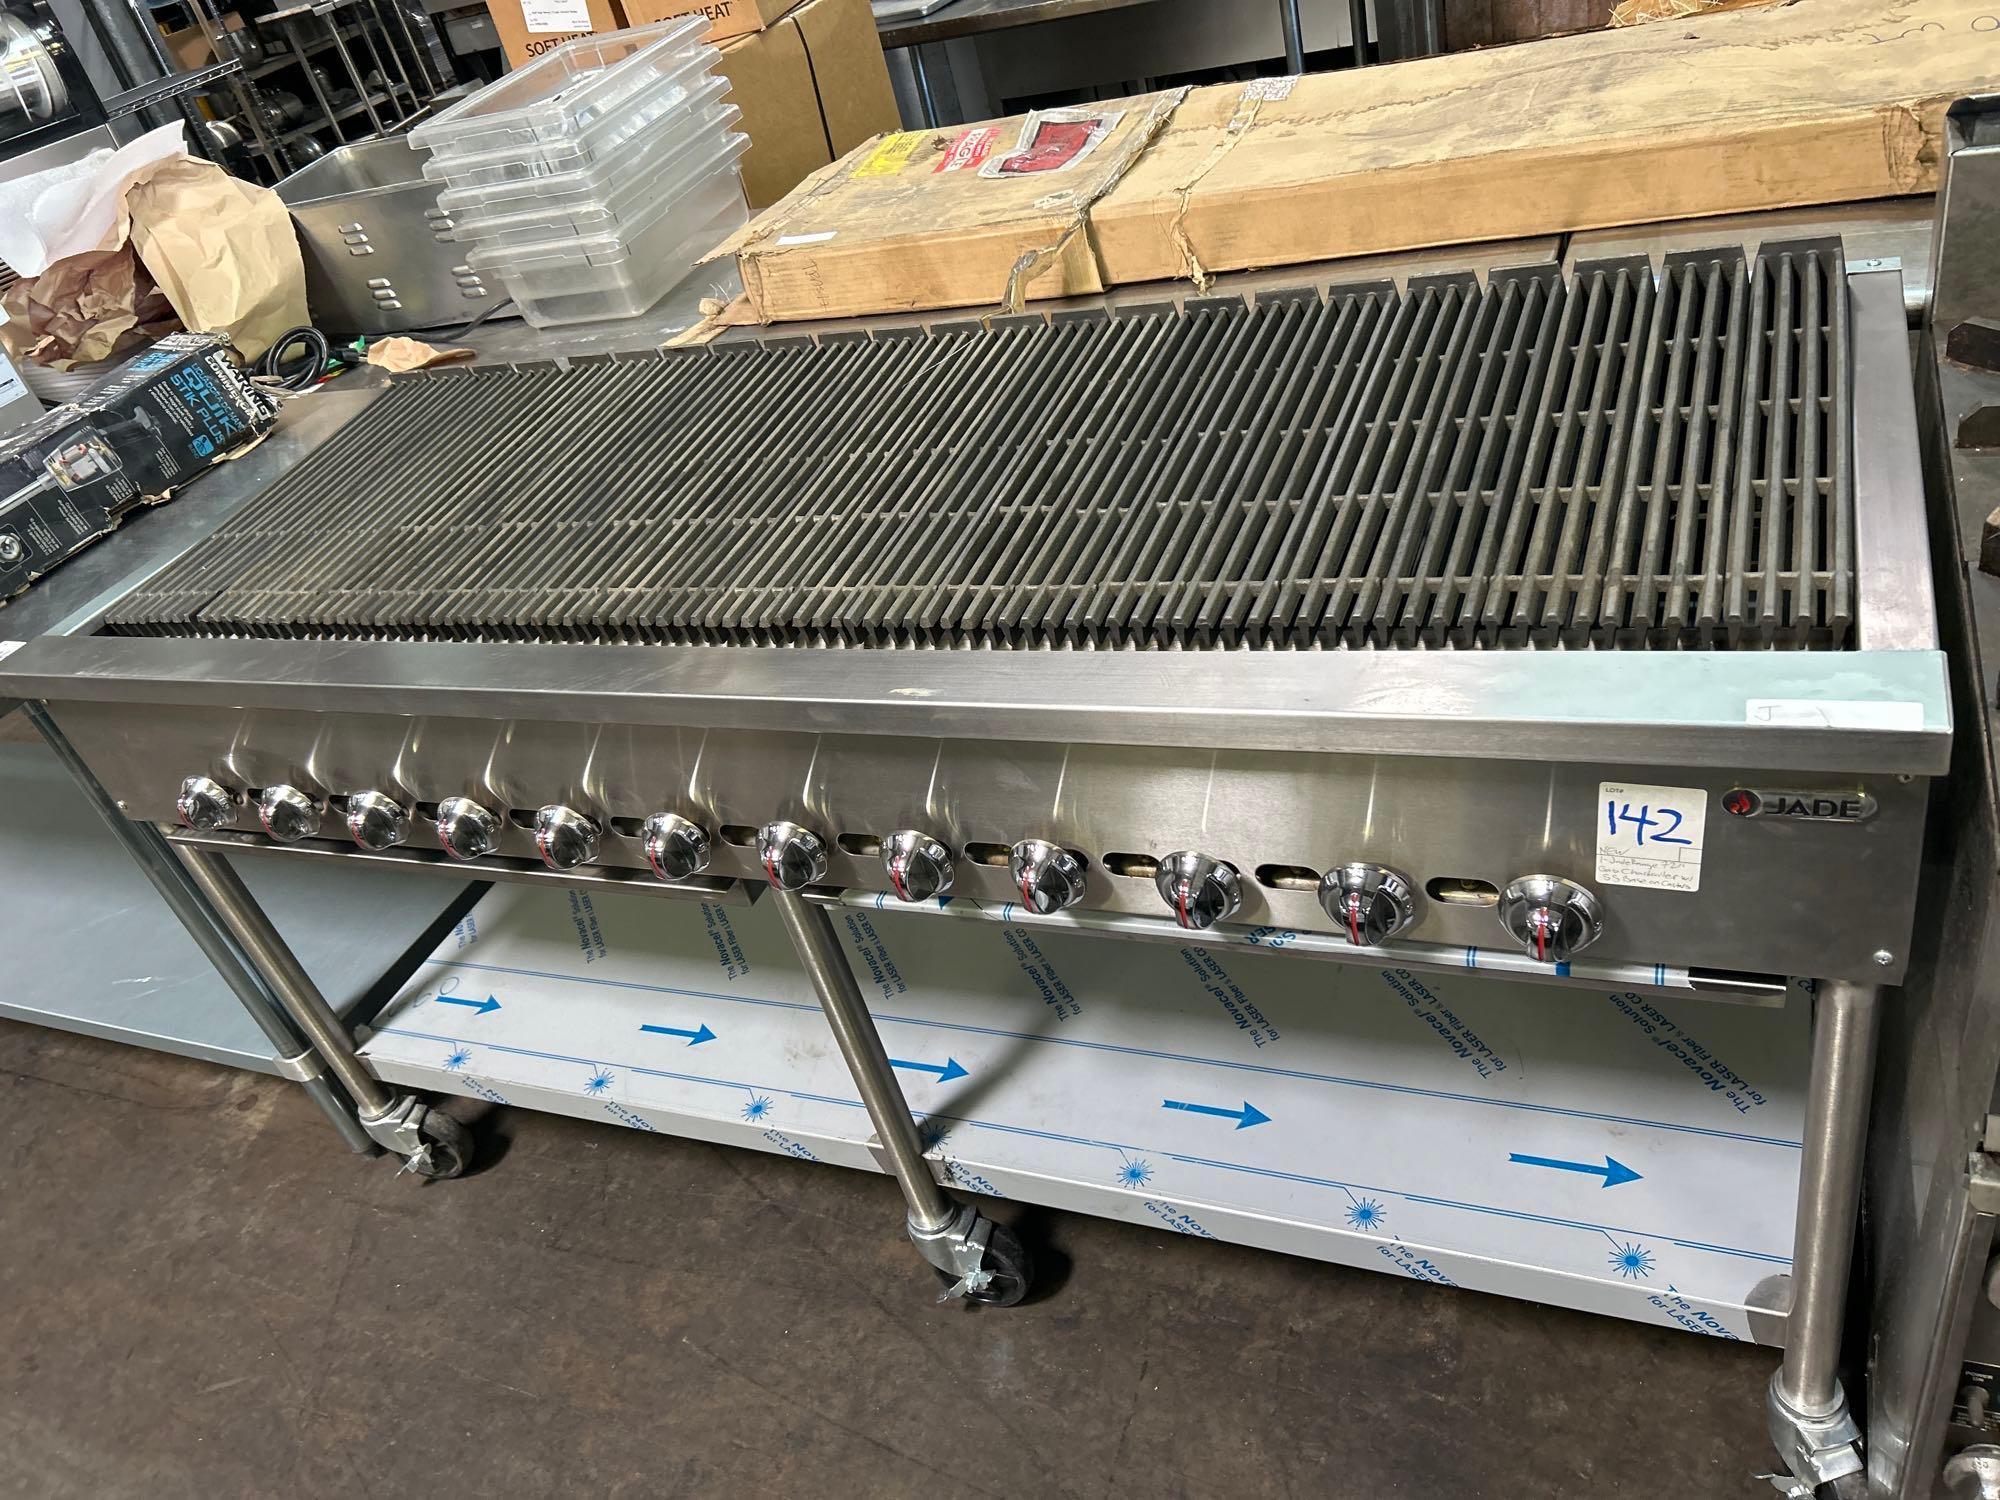 New Jade Range 72 in. Gas Charbroiler with Stainless Steel Base on Casters